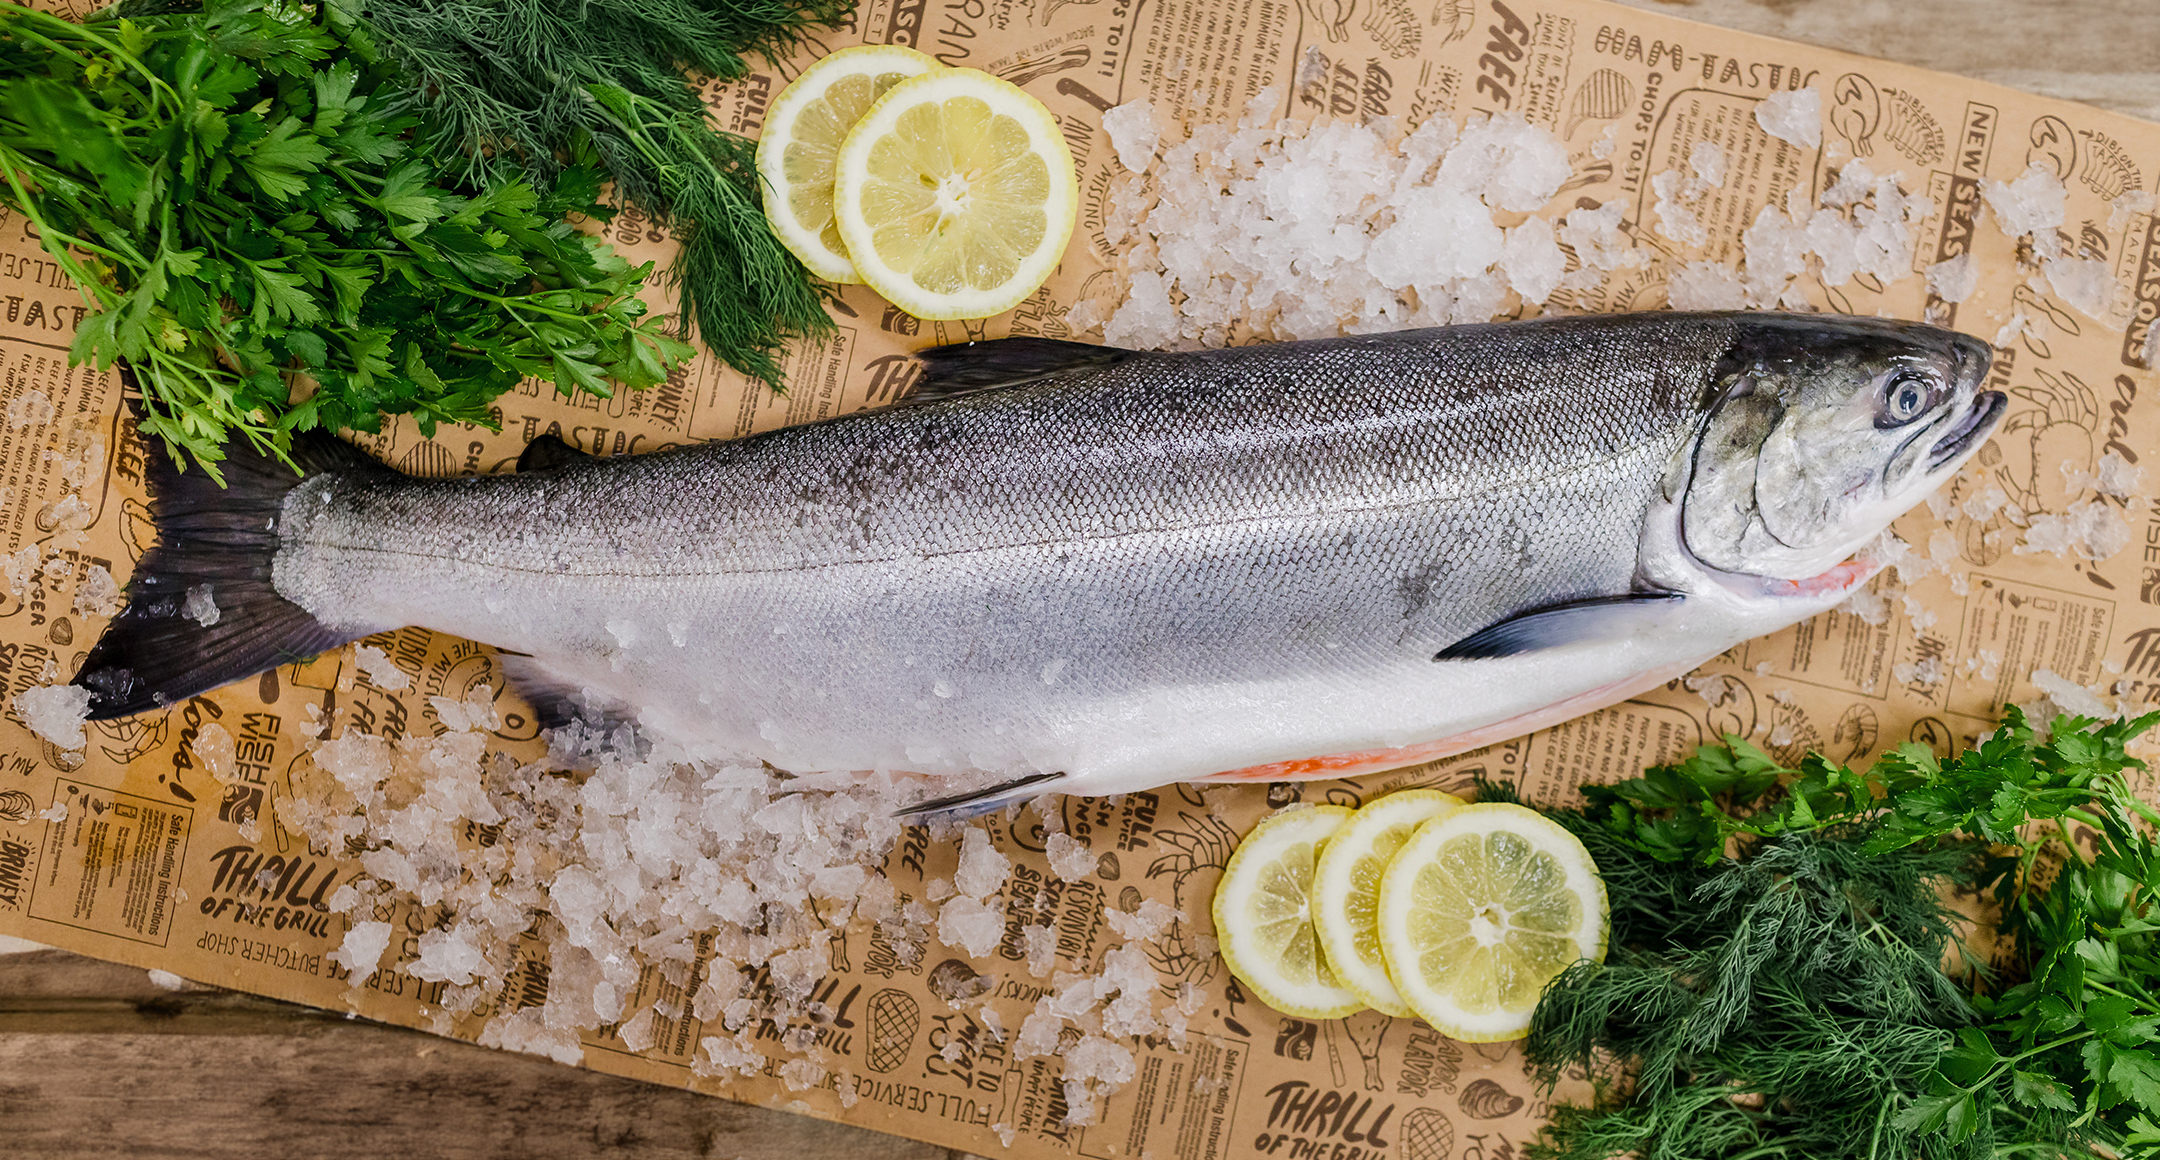 A whole cleaned fish displayed on New Seasons Market brown paper wrap with sliced lemon, fresh herbs, and coarse sea salt on the side.